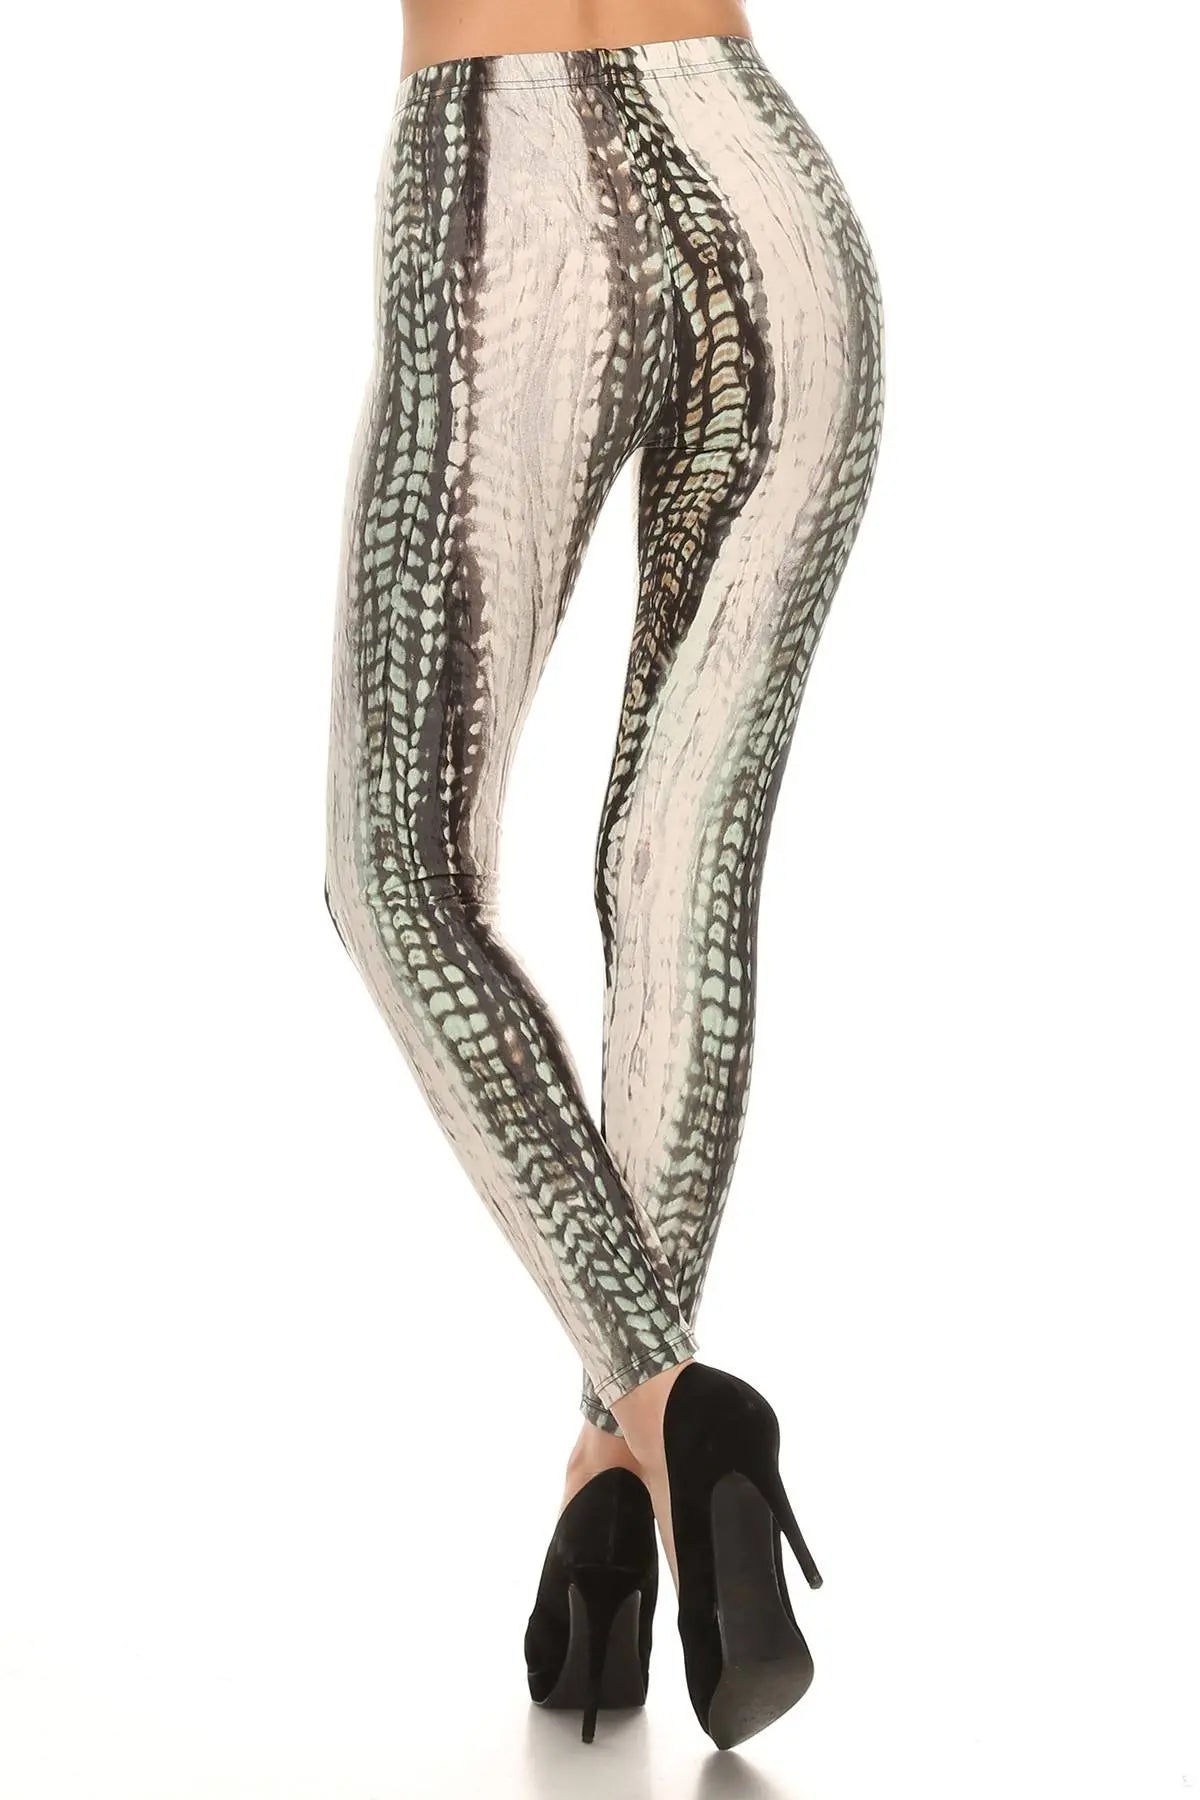 Snake Scales Printed, High Waisted Leggings In Fitted Style With Elastic Waistband Sunny EvE Fashion